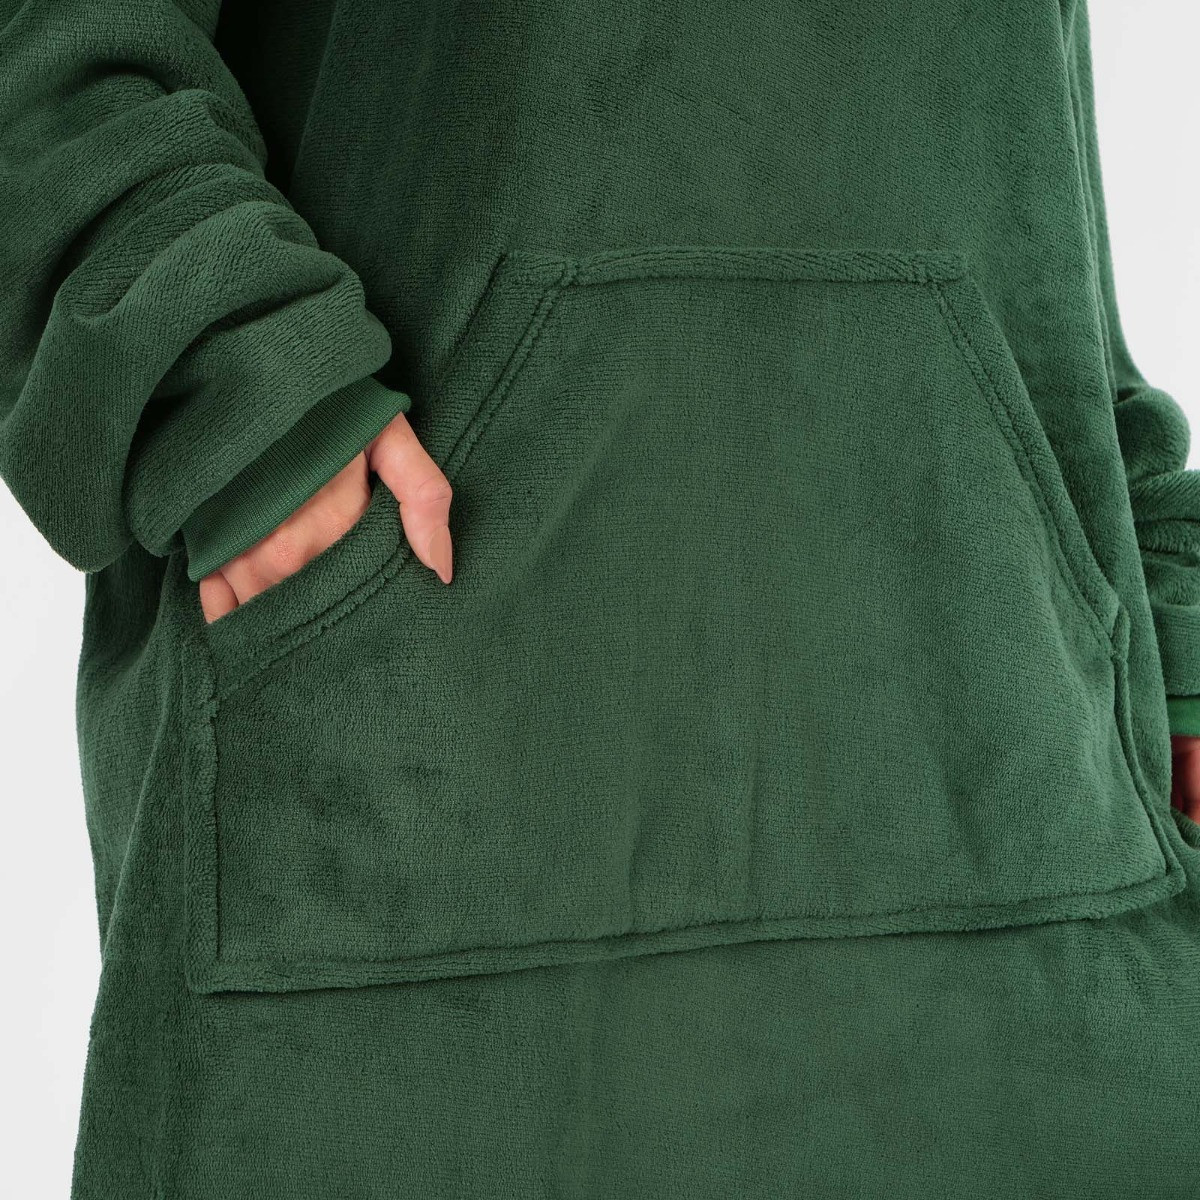 Sienna Supersoft Hoodie Blanket, Adults - Forest Green>